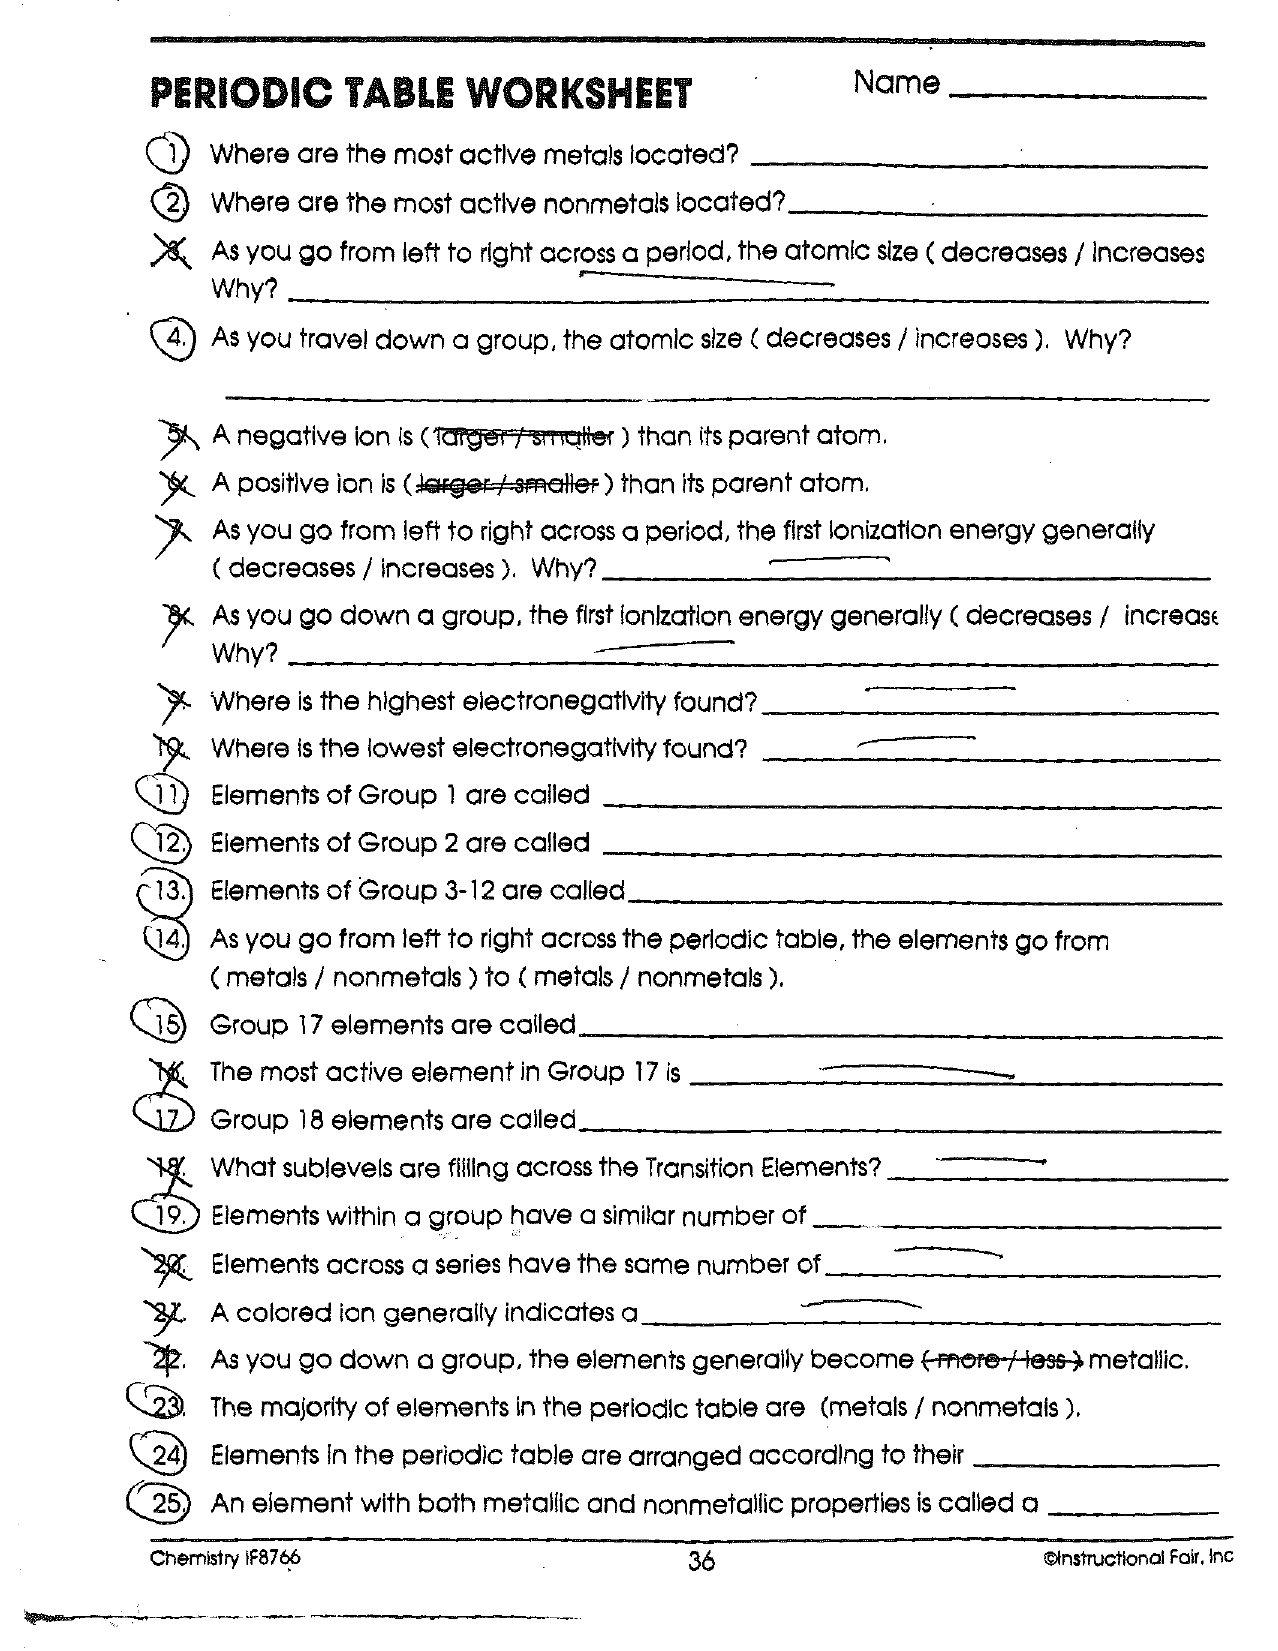 The Periodic Table Worksheet Answers